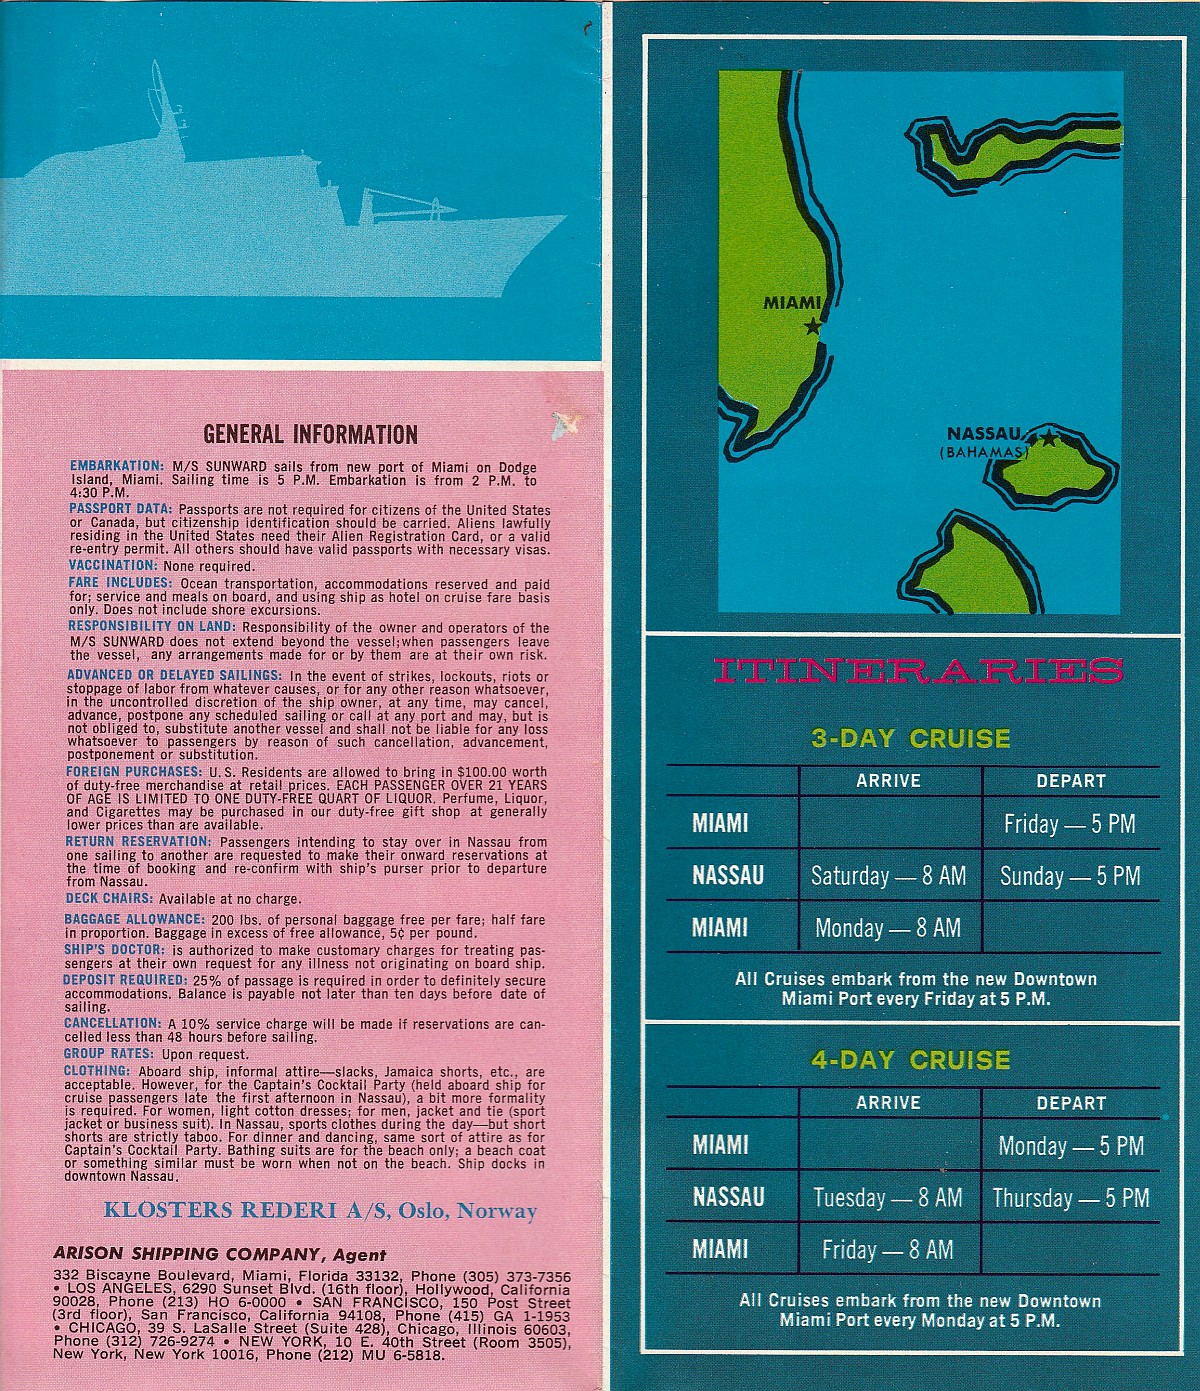 ms Sunward General information & itineraries: ms Sunward departs from new port of Miami on Dodge Island